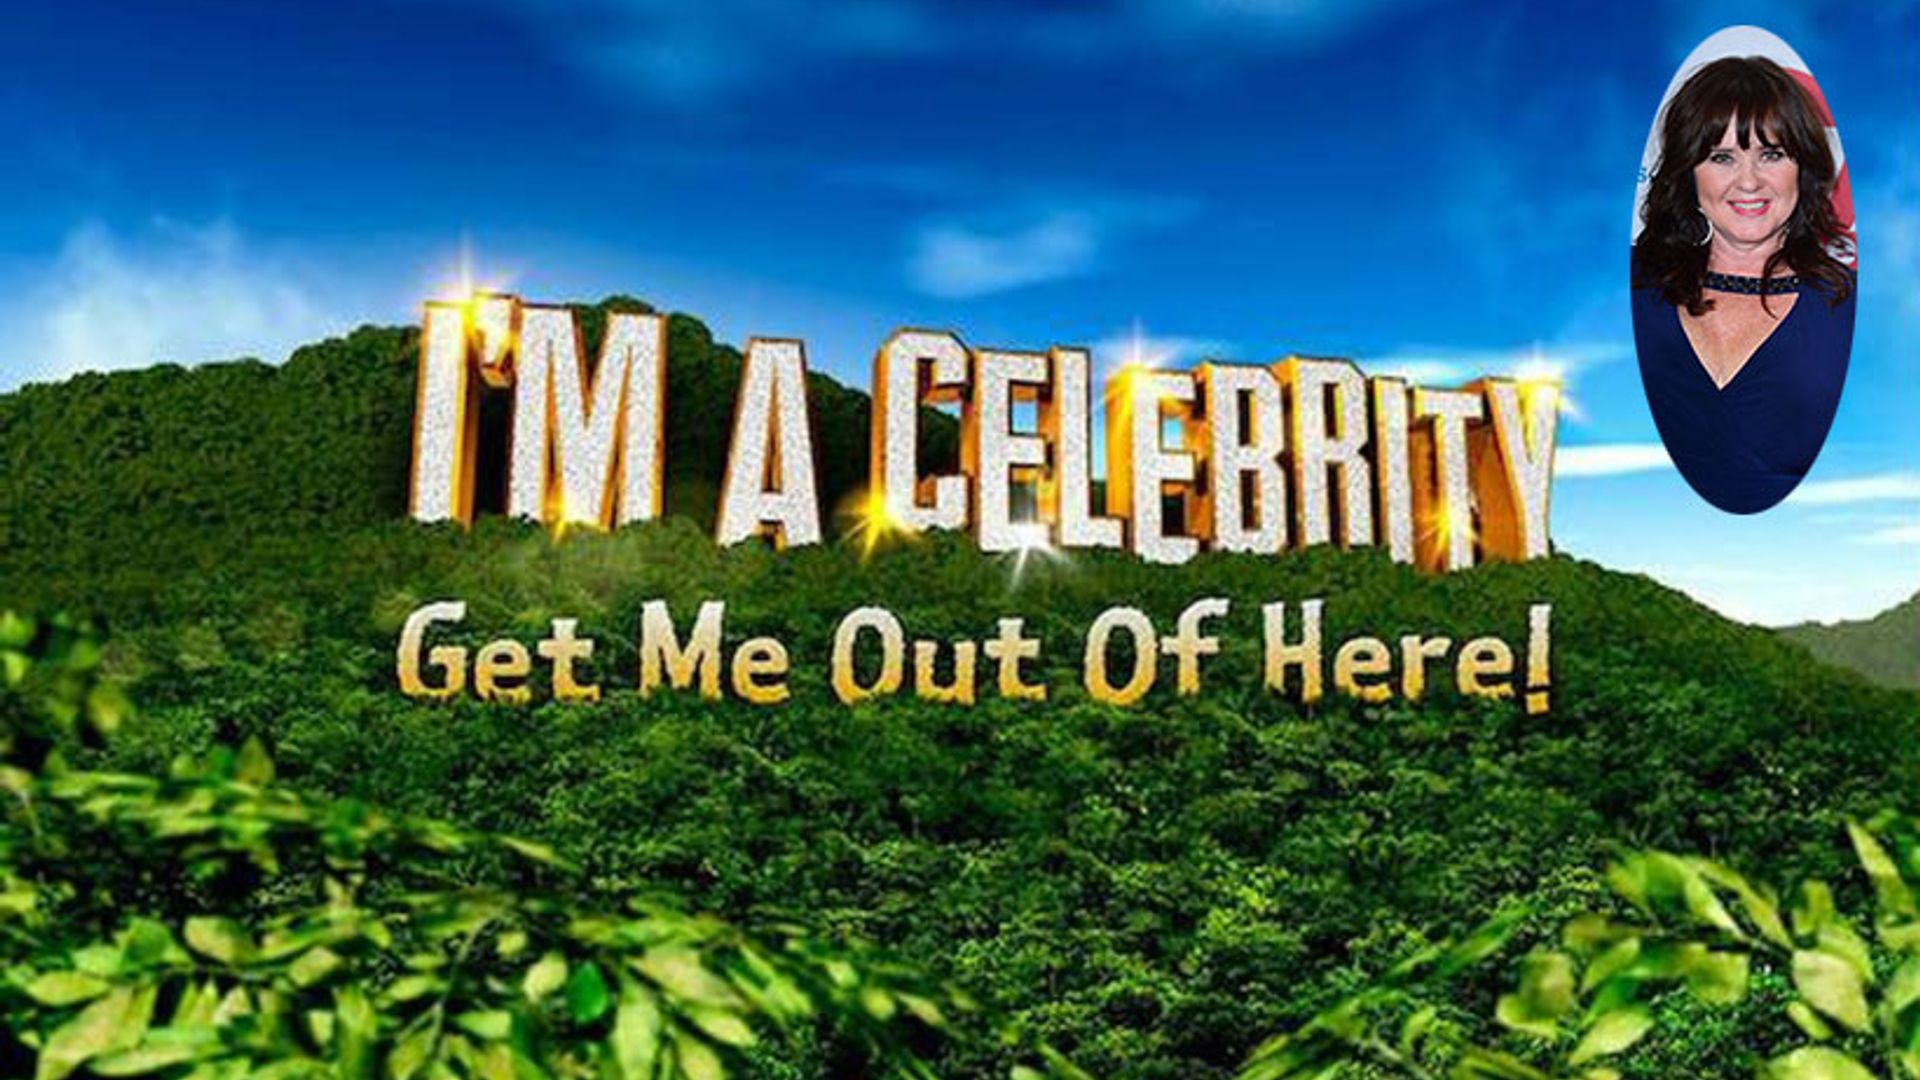 Coleen Nolan breaks silence to confirm I'm A Celebrity news